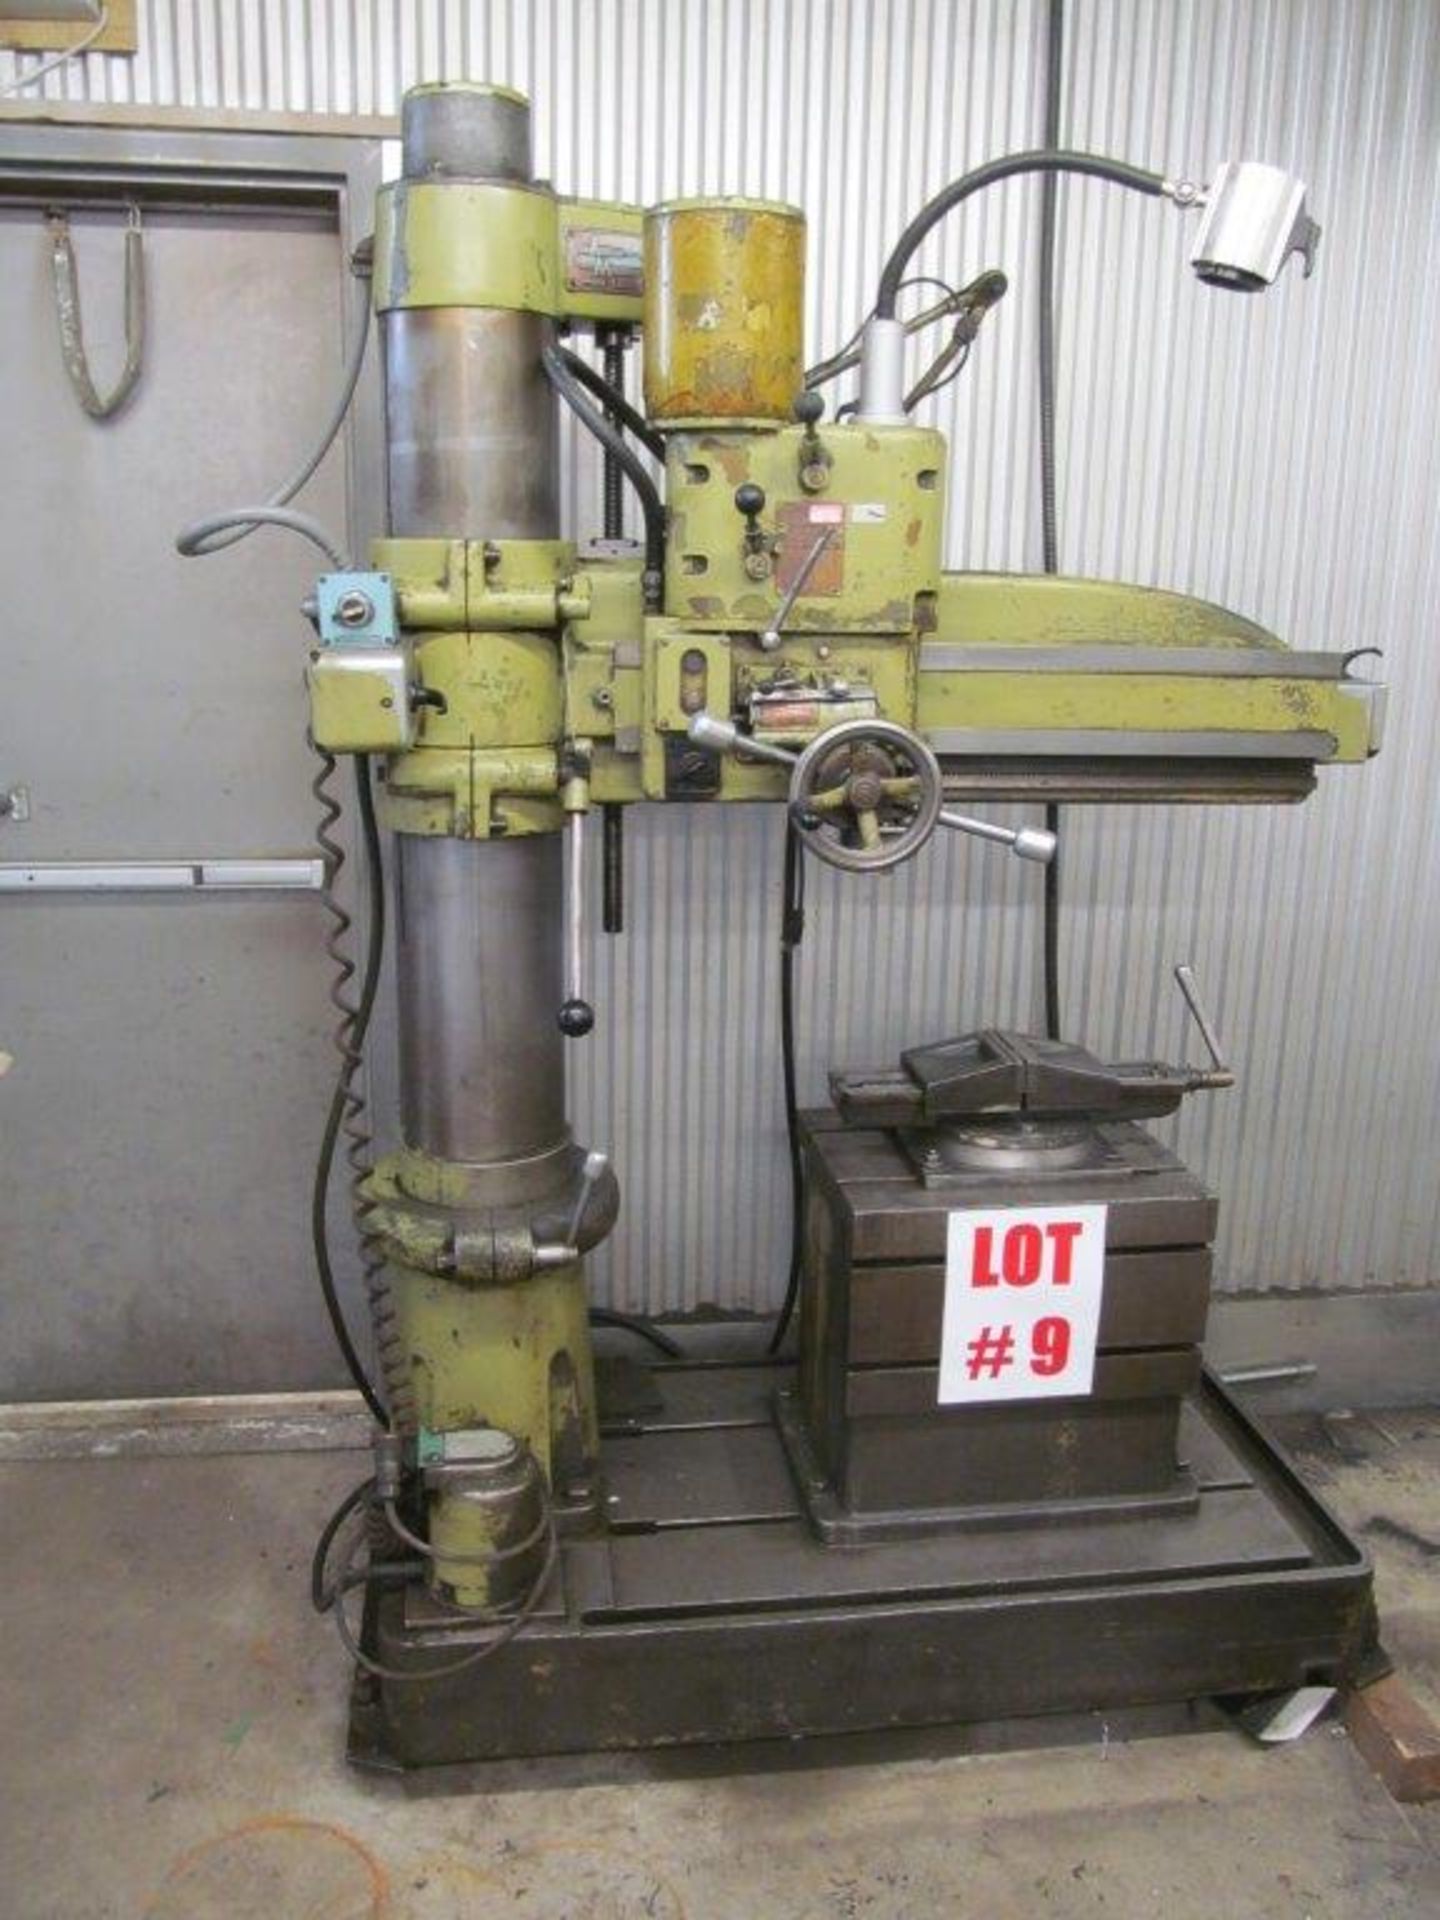 ARBOGA (SWEDEN) RADIAL ARM DRILL, 3 FT ARM, MODEL: MH, S/N: 98090, C/W BOX TABLE 16" X 20" X 19-1/2" - Image 2 of 3